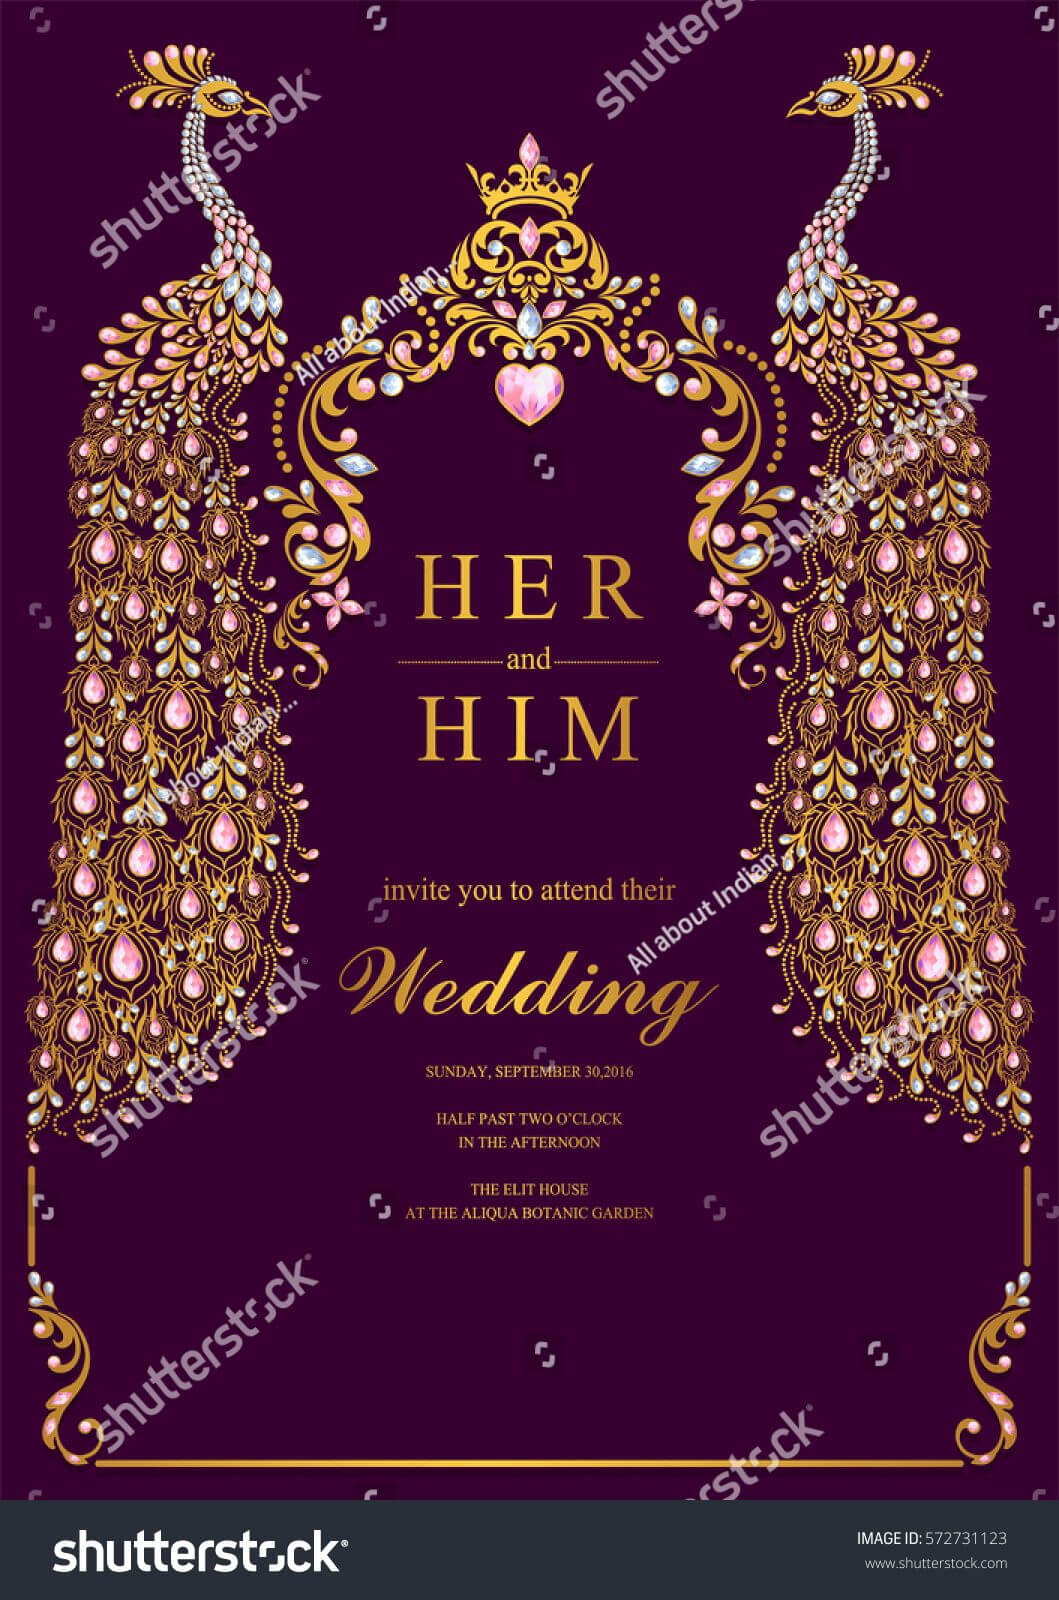 Indian Wedding Invitation Card Templates With Gold Peacock Throughout Indian Wedding Cards Design Templates